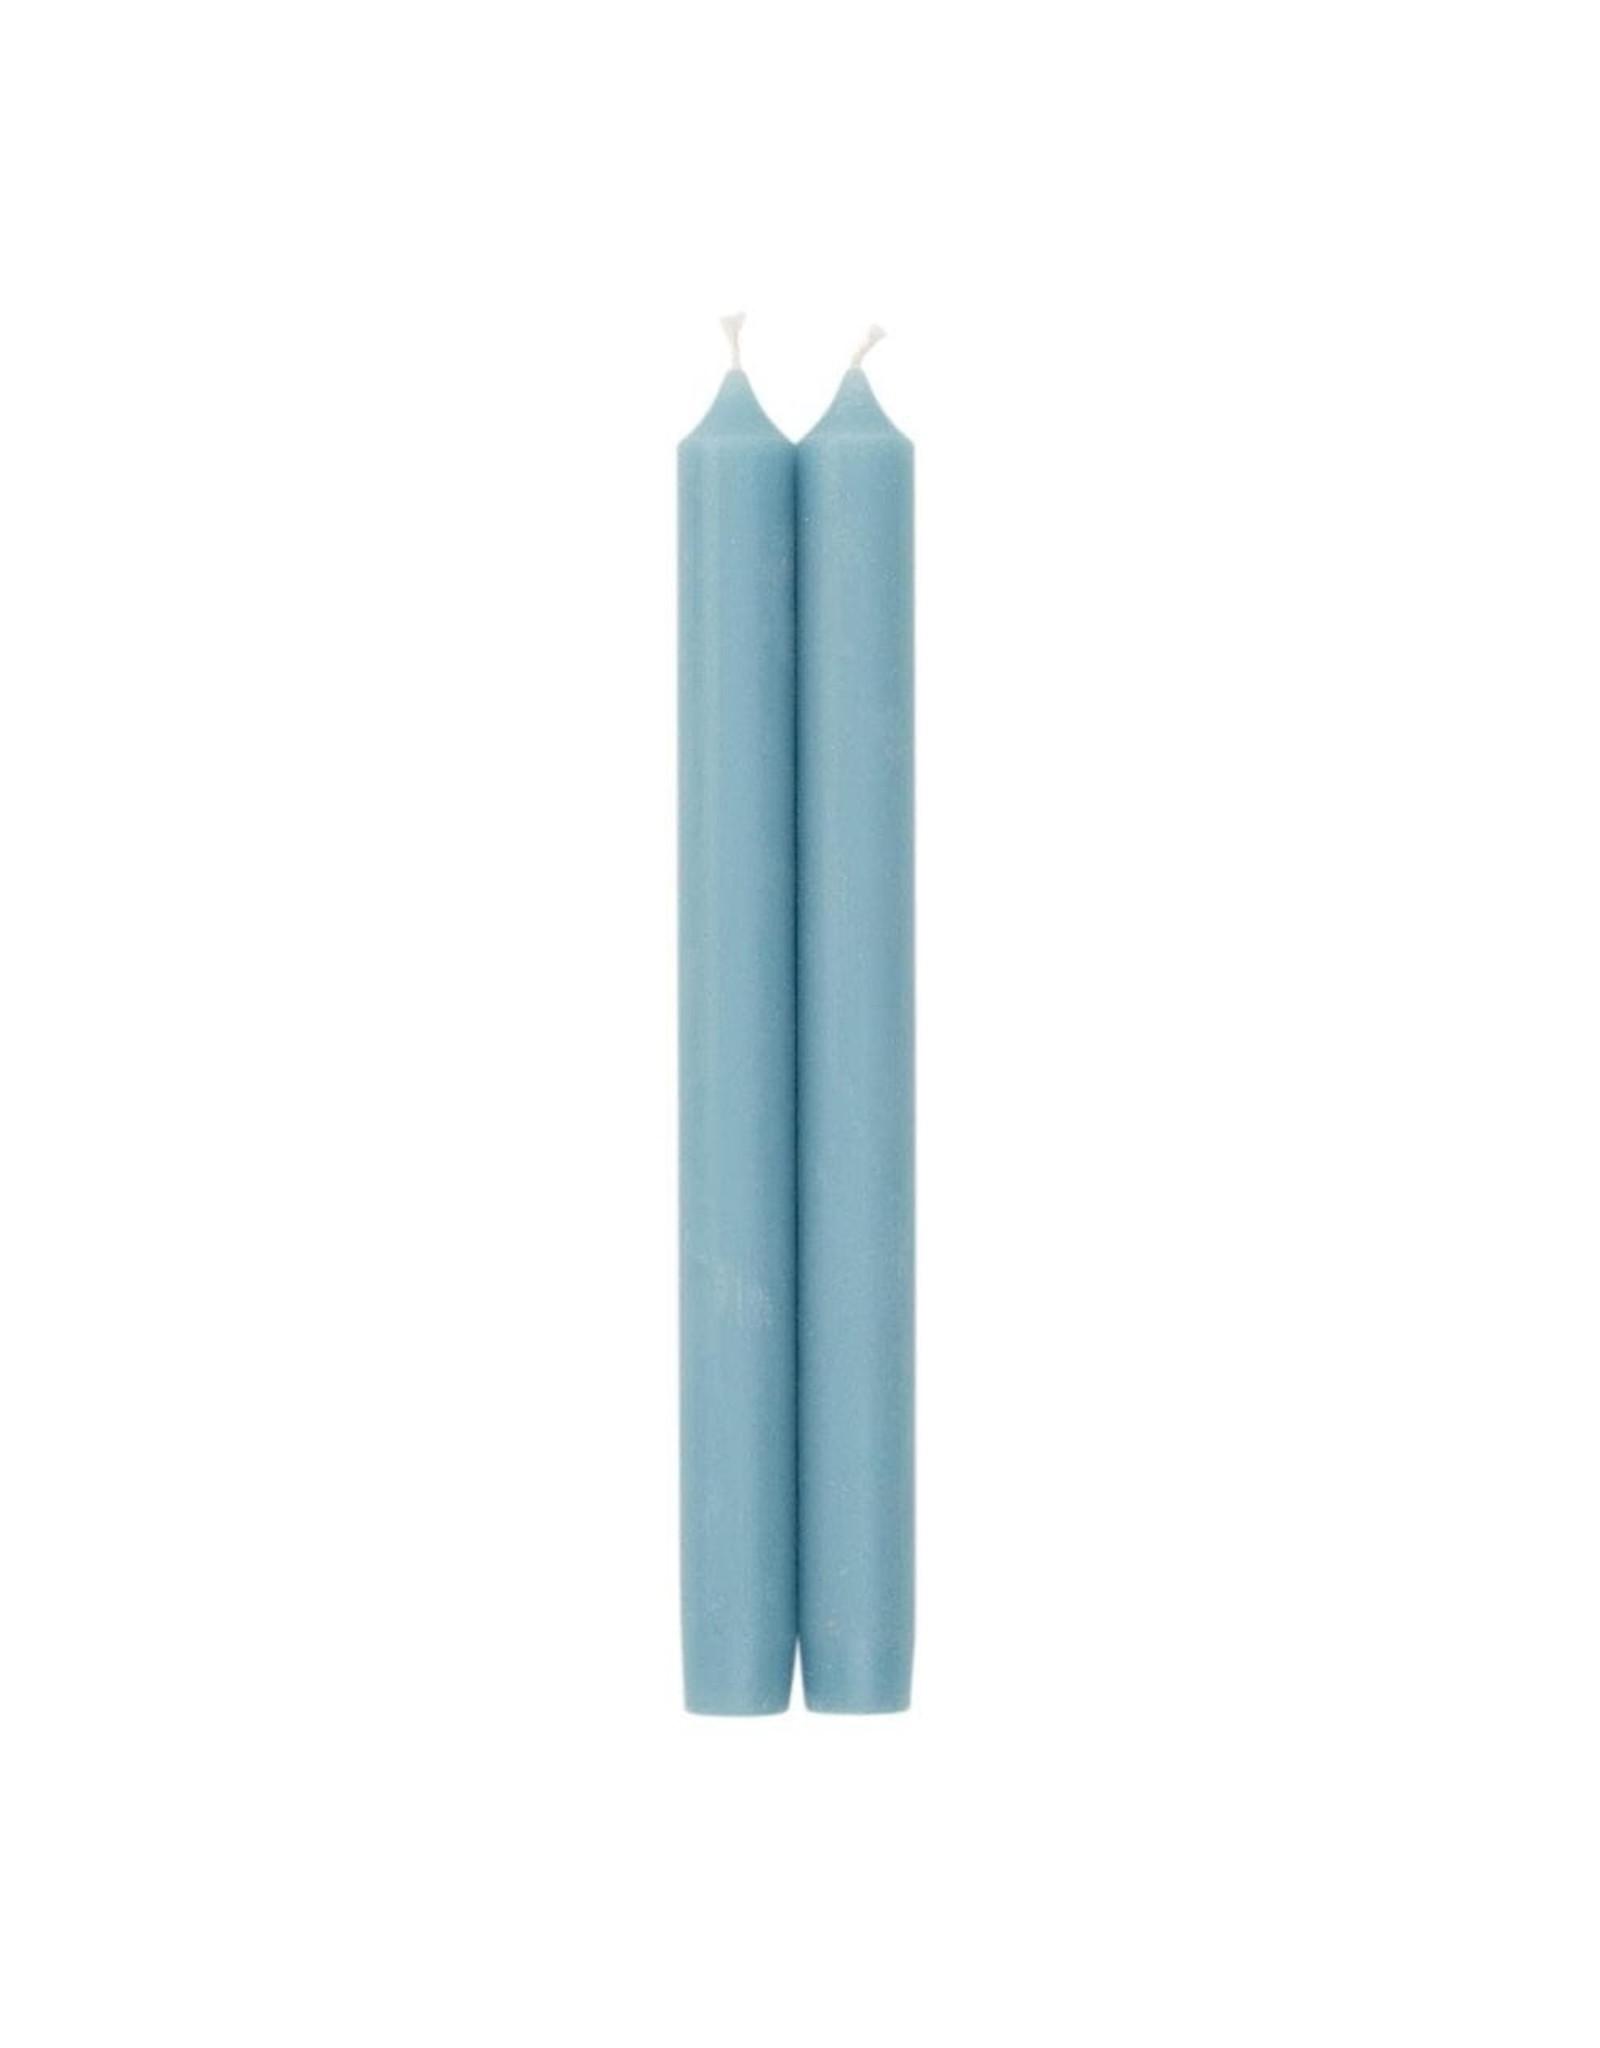 Caspari Crown Candles Tapers 10 inch 2pk Stone Blue